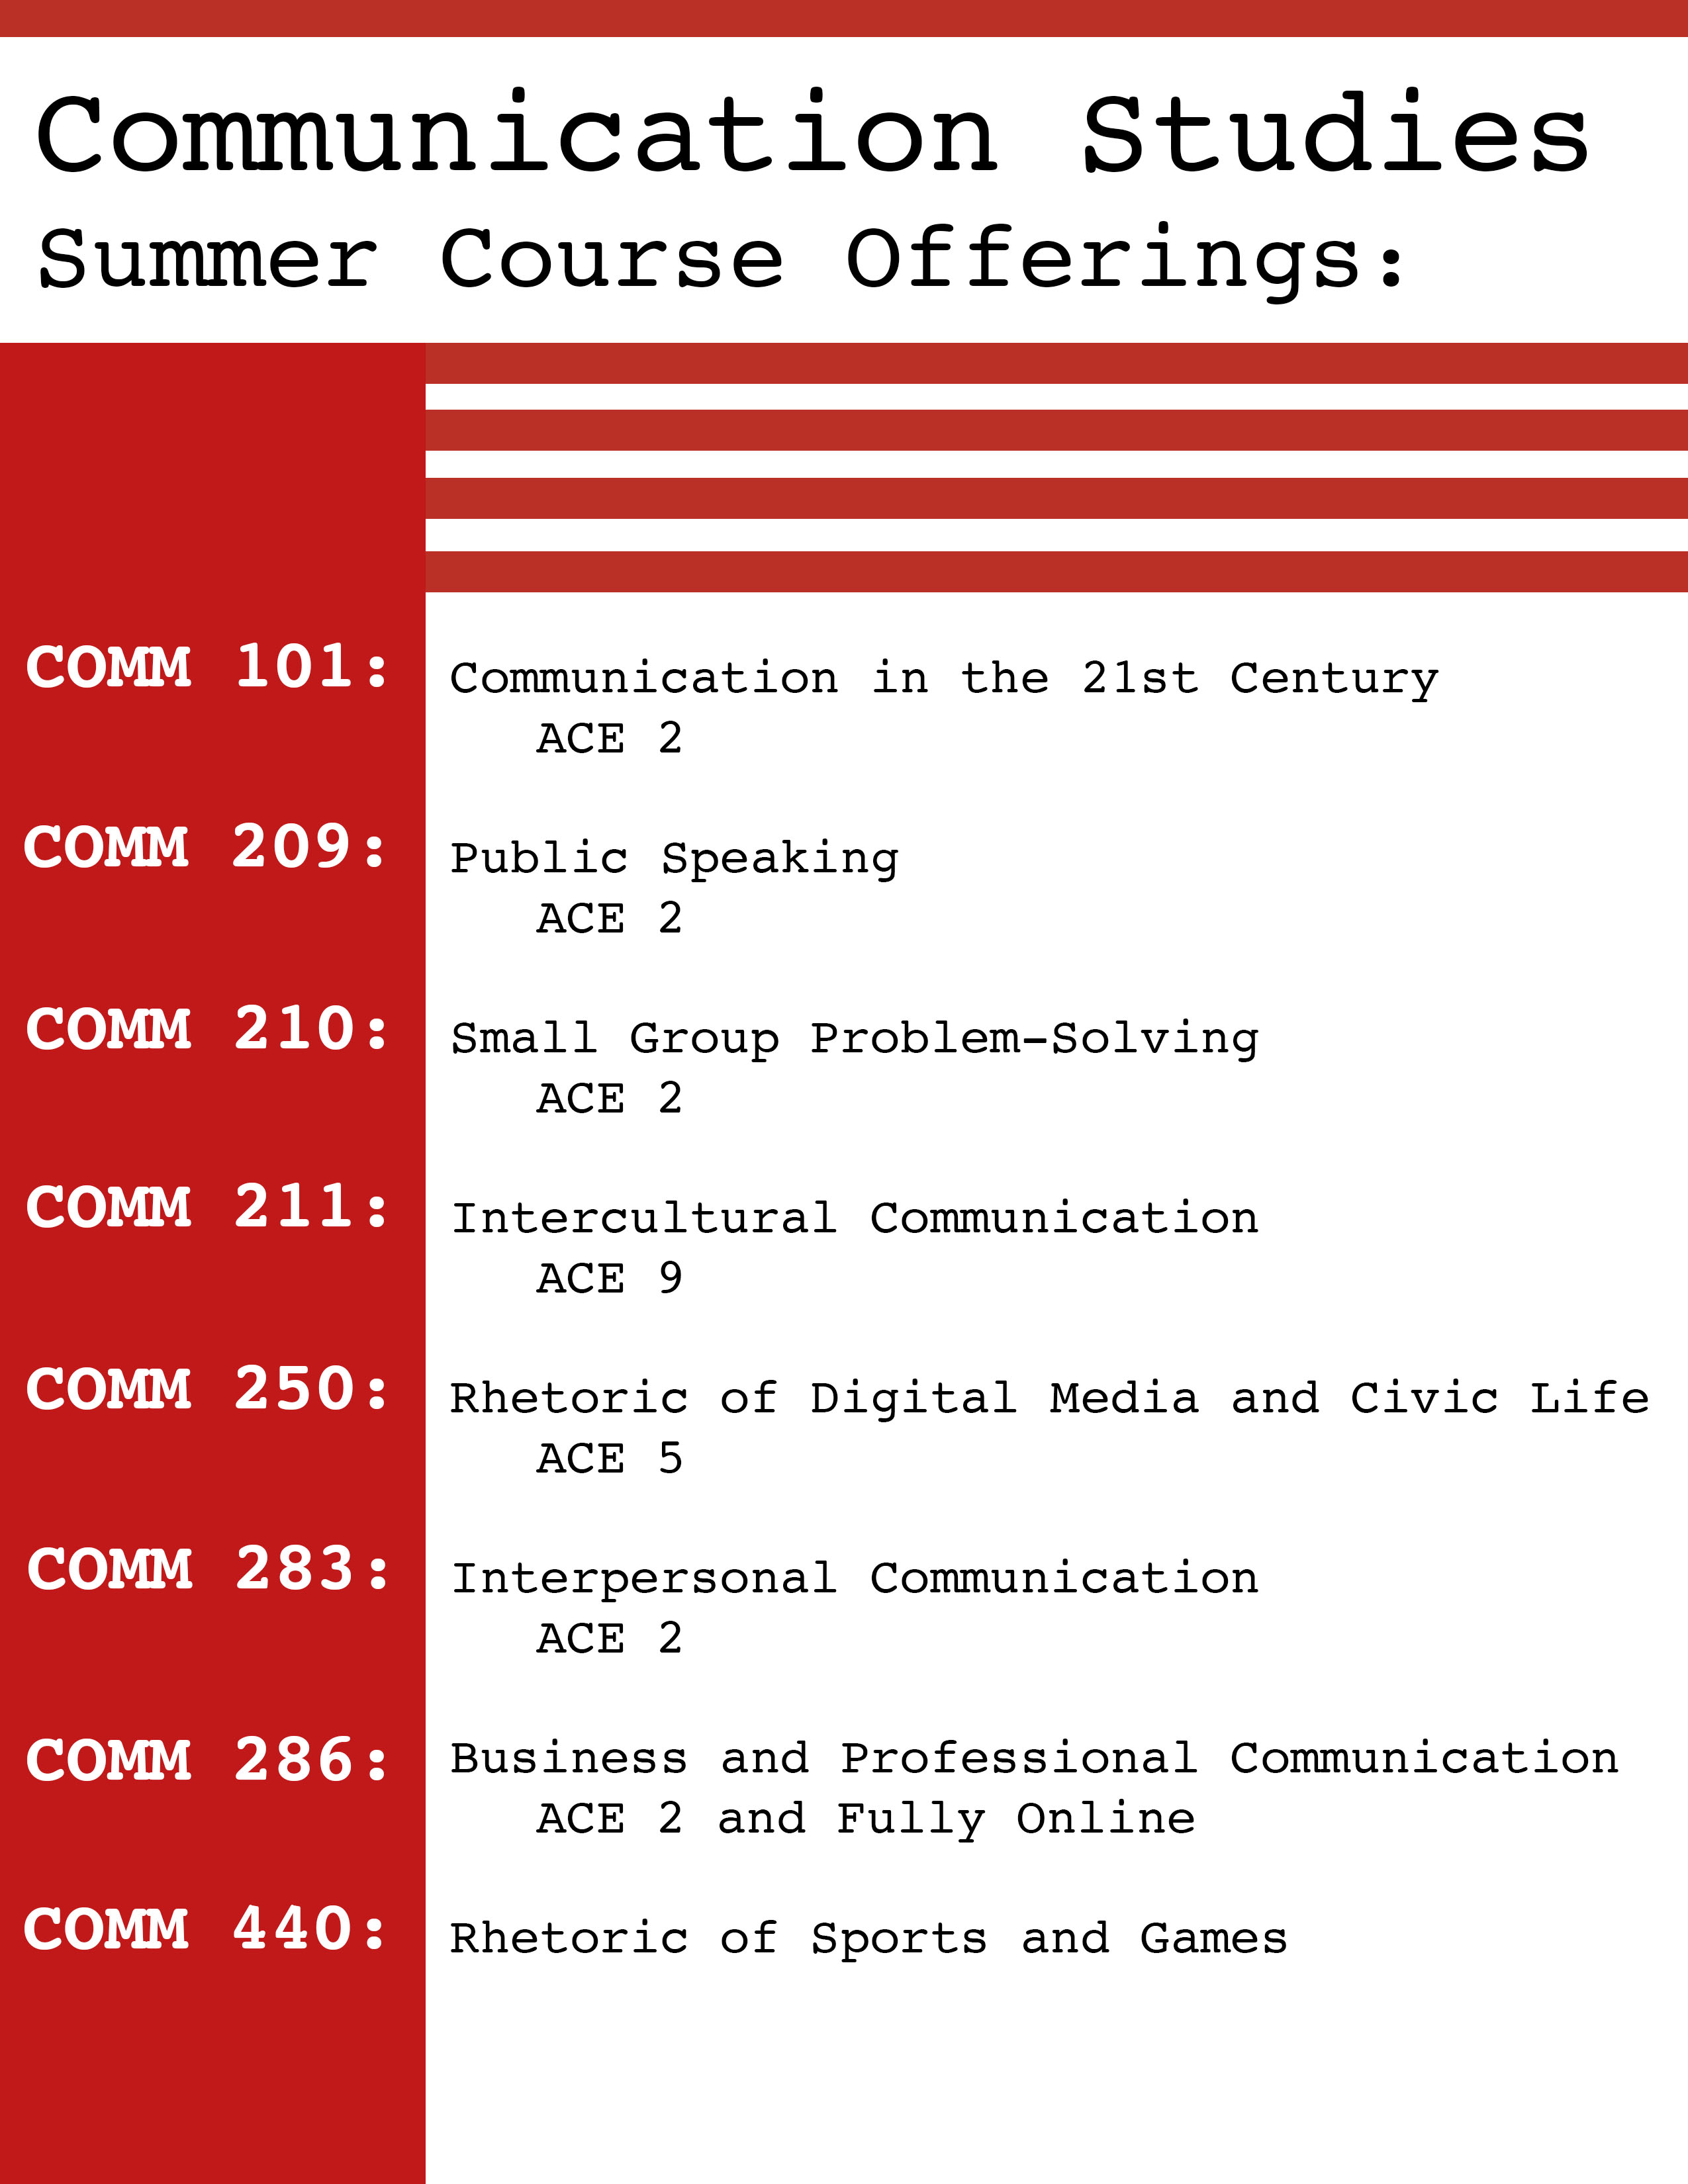 Summer Courses